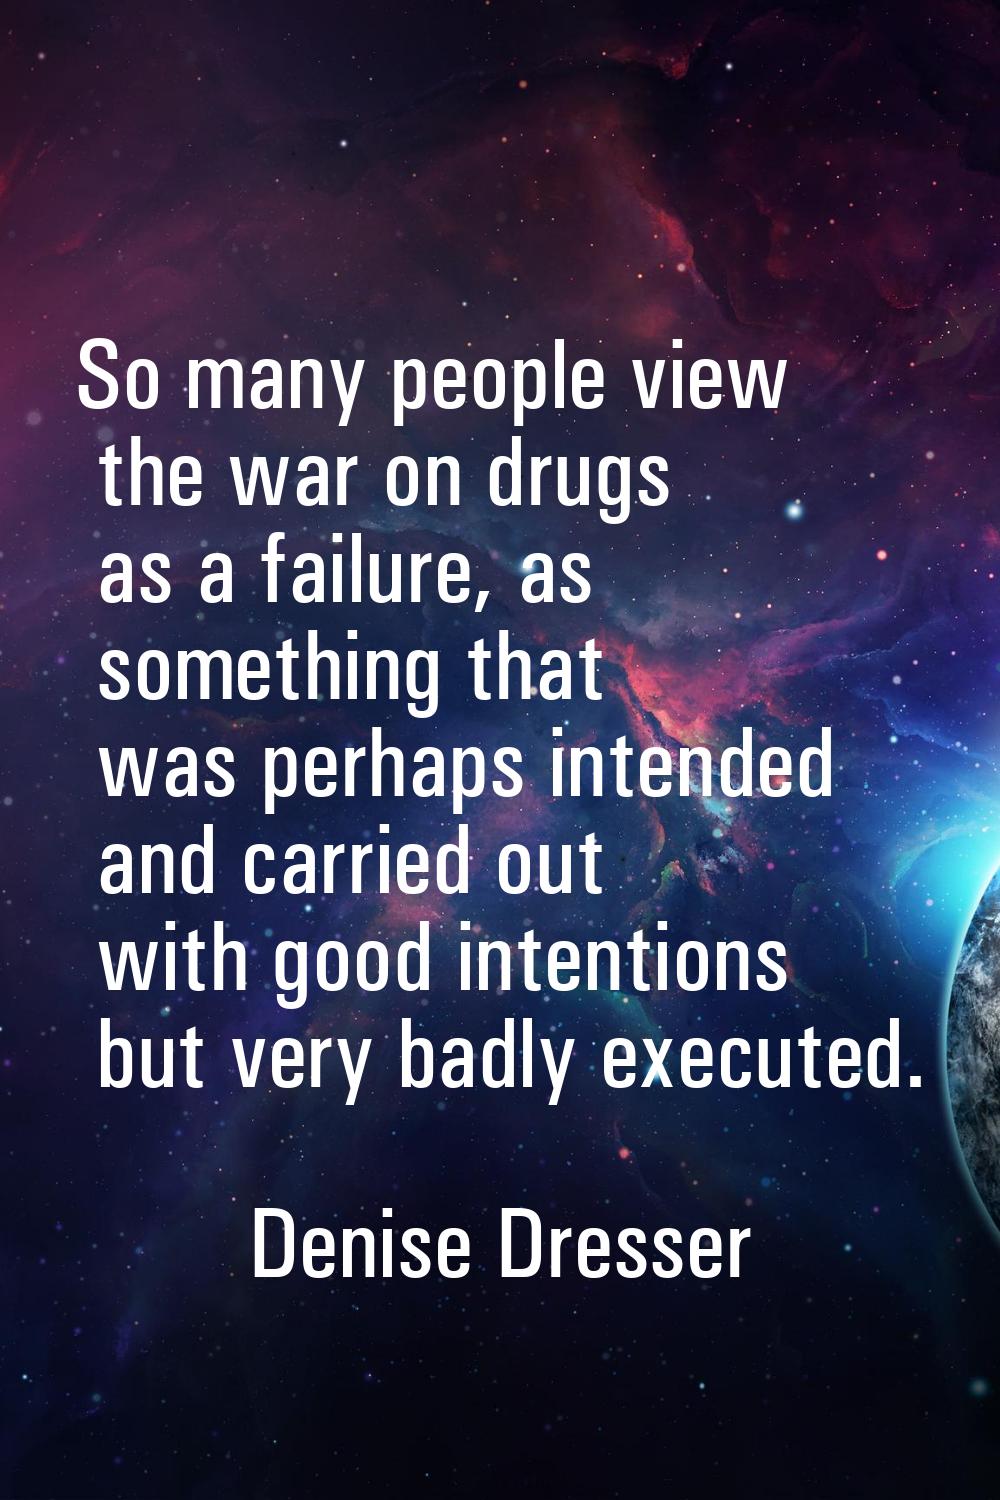 So many people view the war on drugs as a failure, as something that was perhaps intended and carri